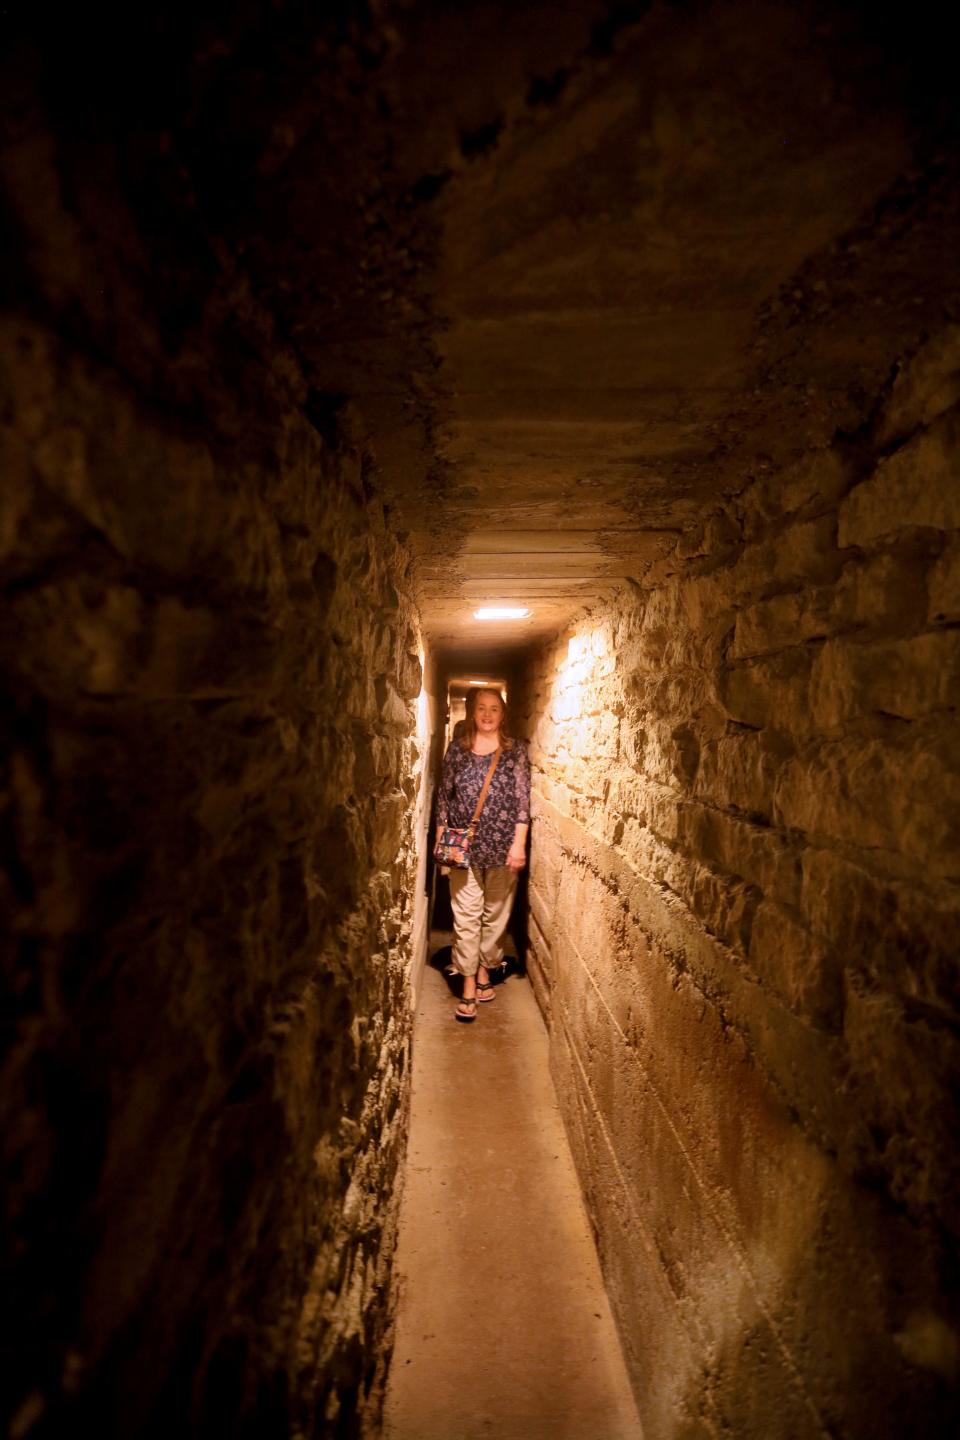 Sis Schmidt tours the tunnel that was part of the Underground Railroad used by slaves seeking freedom at the Milton House Museum. The original tunnel averaged 3½ feet in height. The height was raised to its current 6 feet in the 1950s to allow tourists to experience the space.